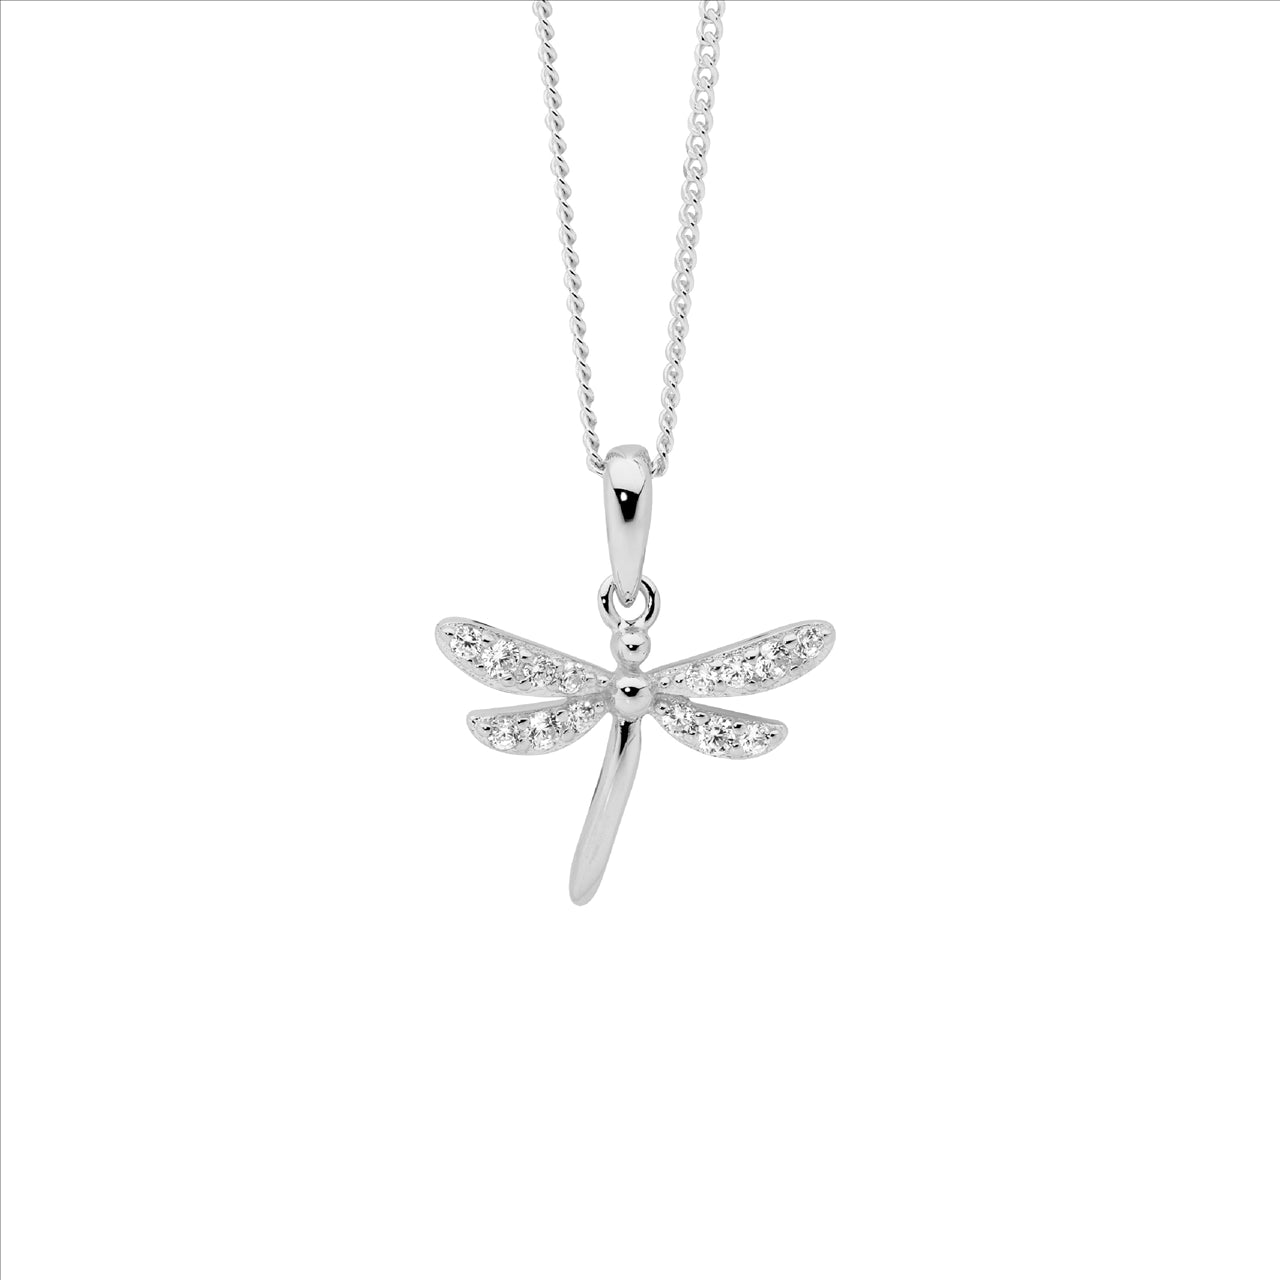 Dragonfly Necklace set with Cubic Zirconias - Sterling Silver.